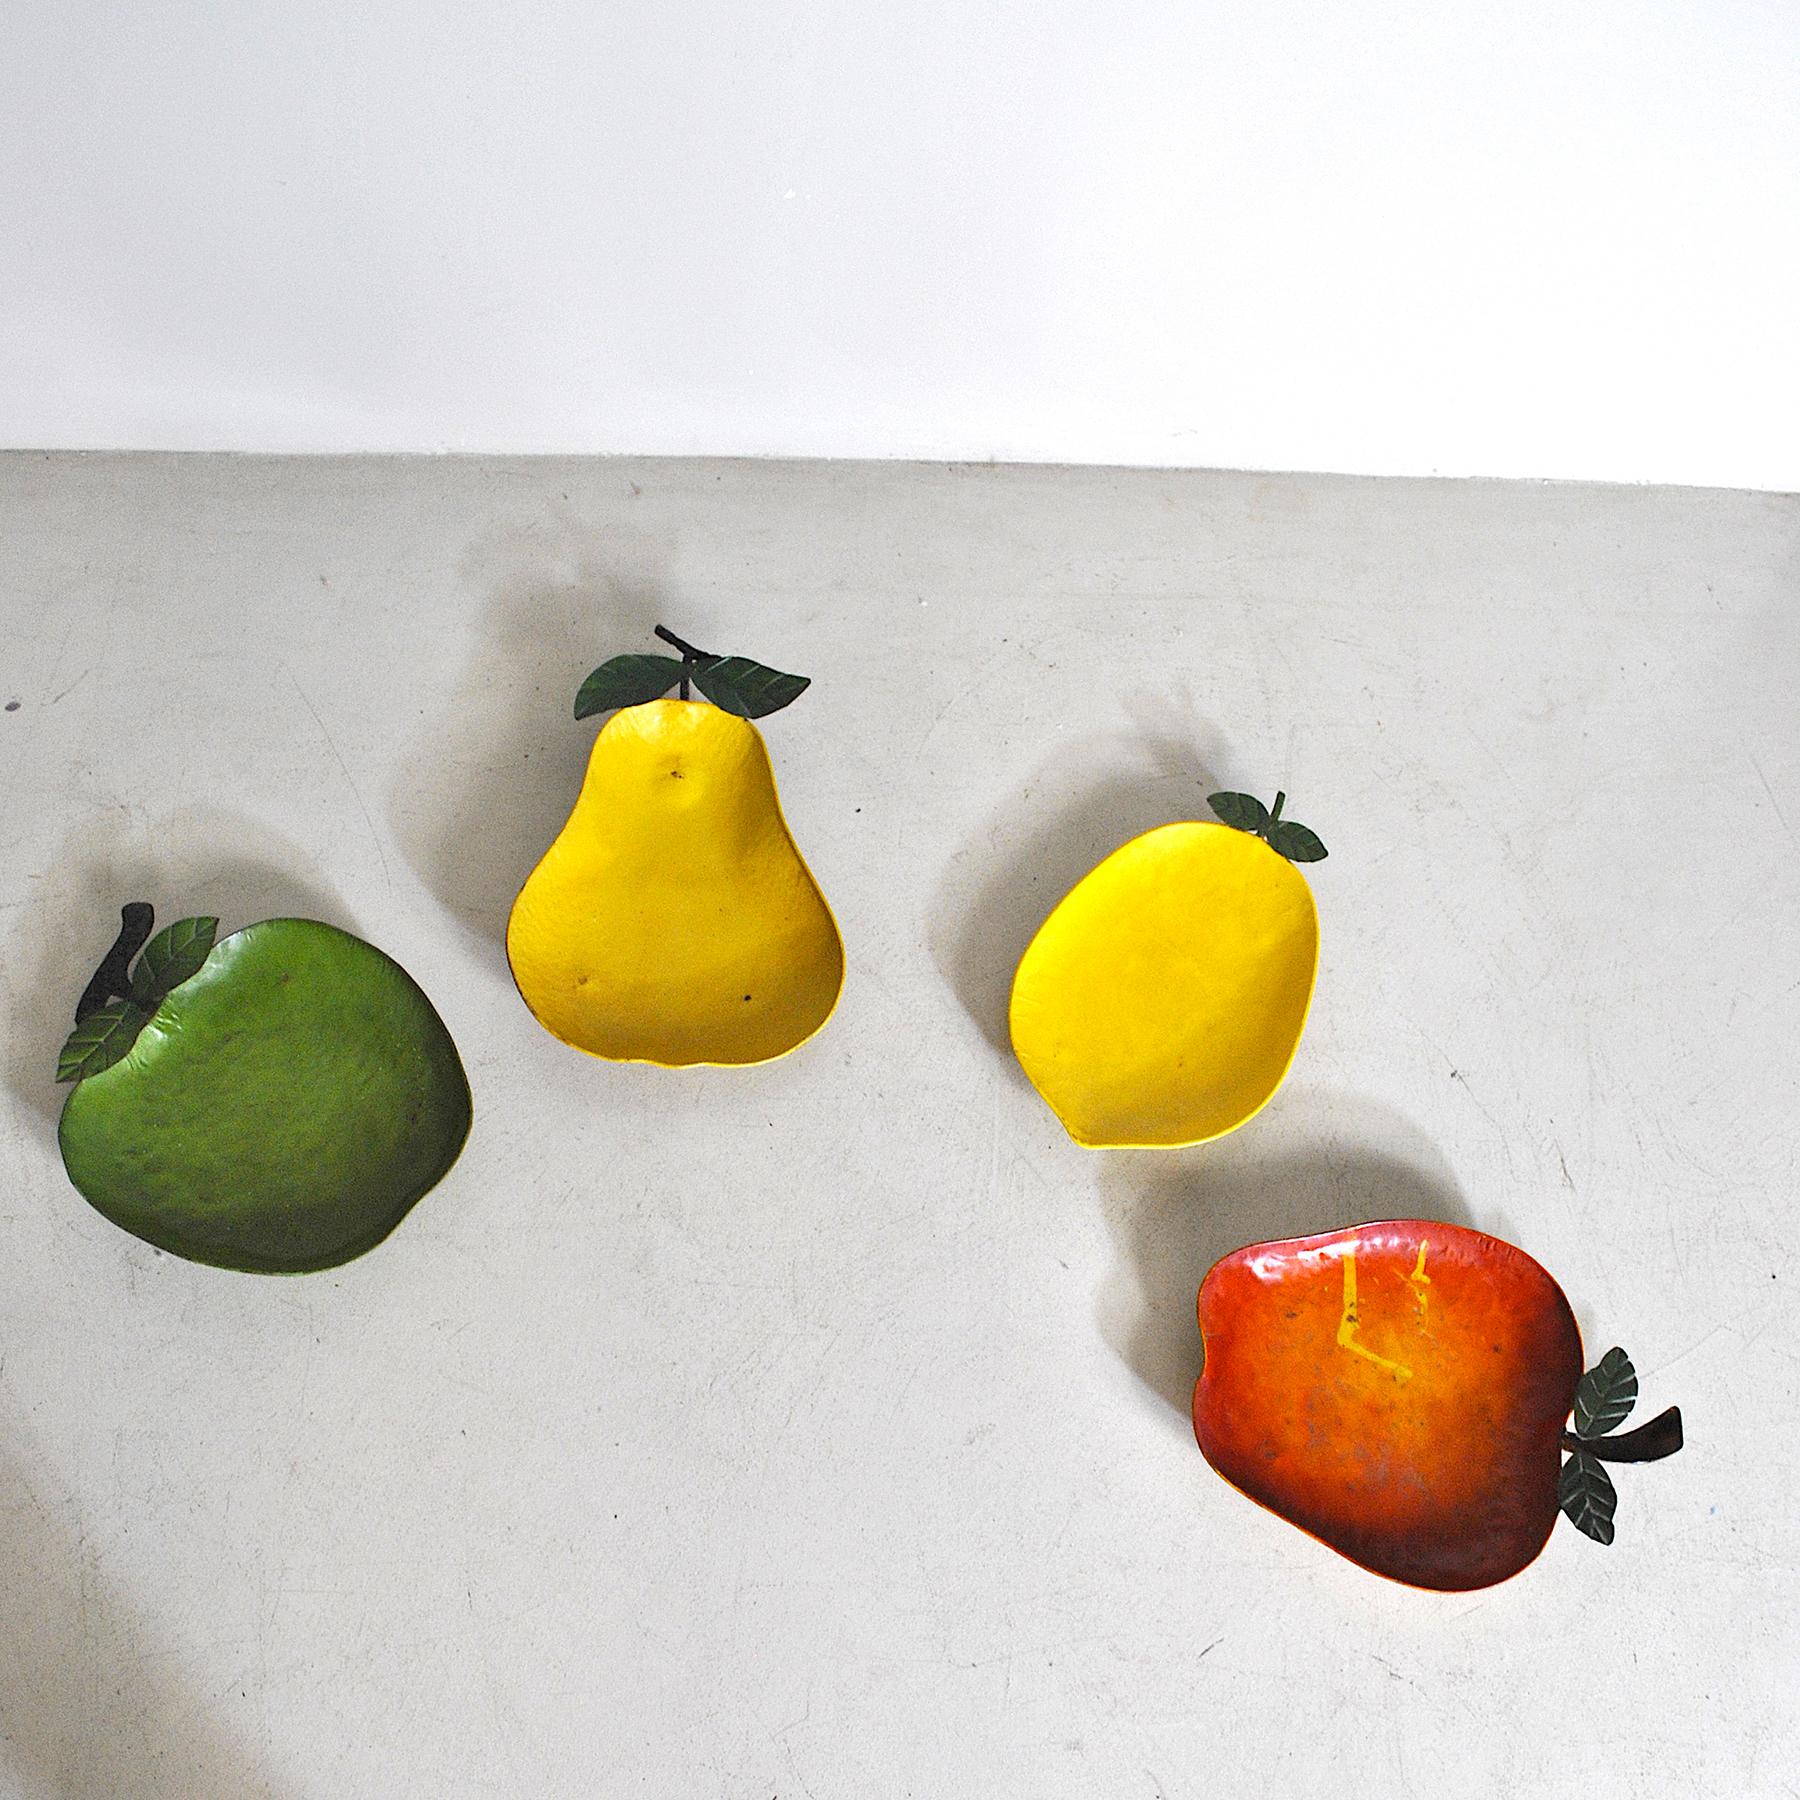 Mid-Century Modern Set of 4 Fruit-Shaped Objects in Enameled Metal, Italian Manufacture For Sale